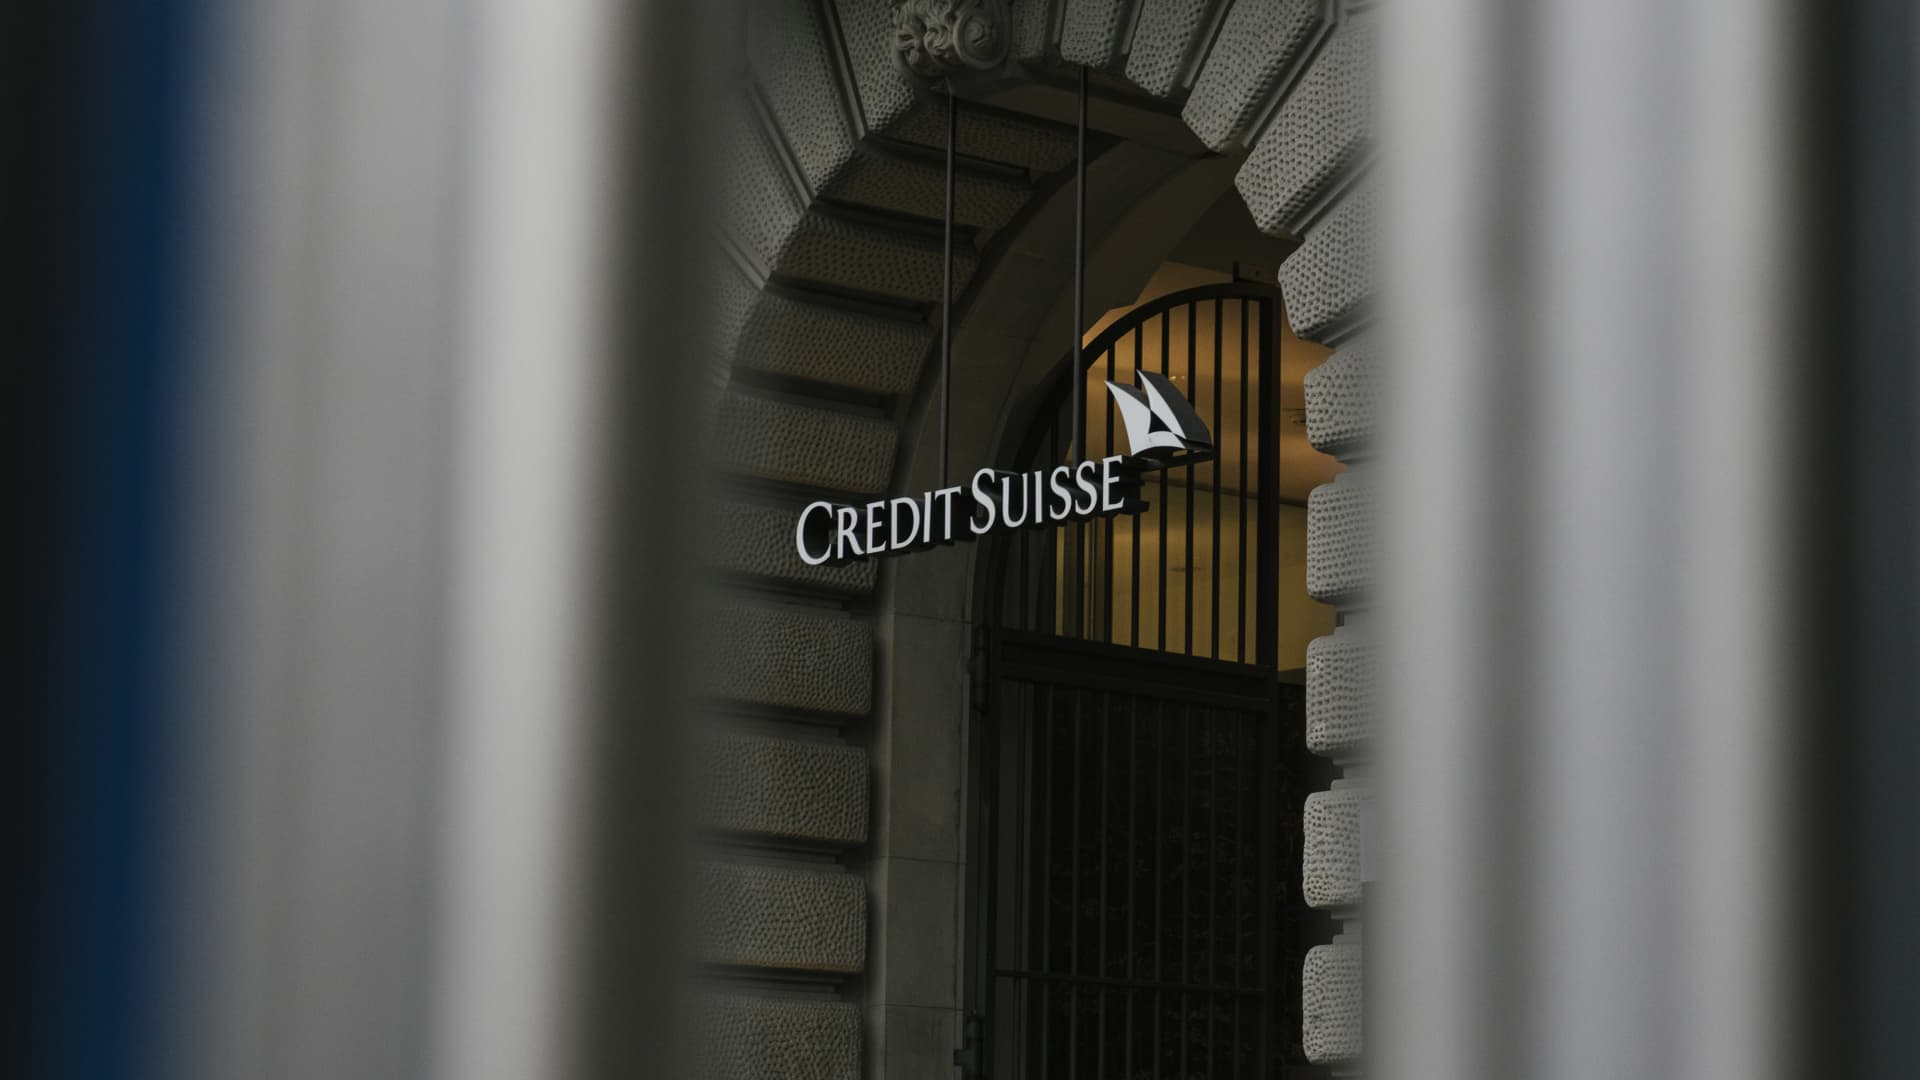 Credit Suisse hit with stock and credit downgrades after earnings plunge